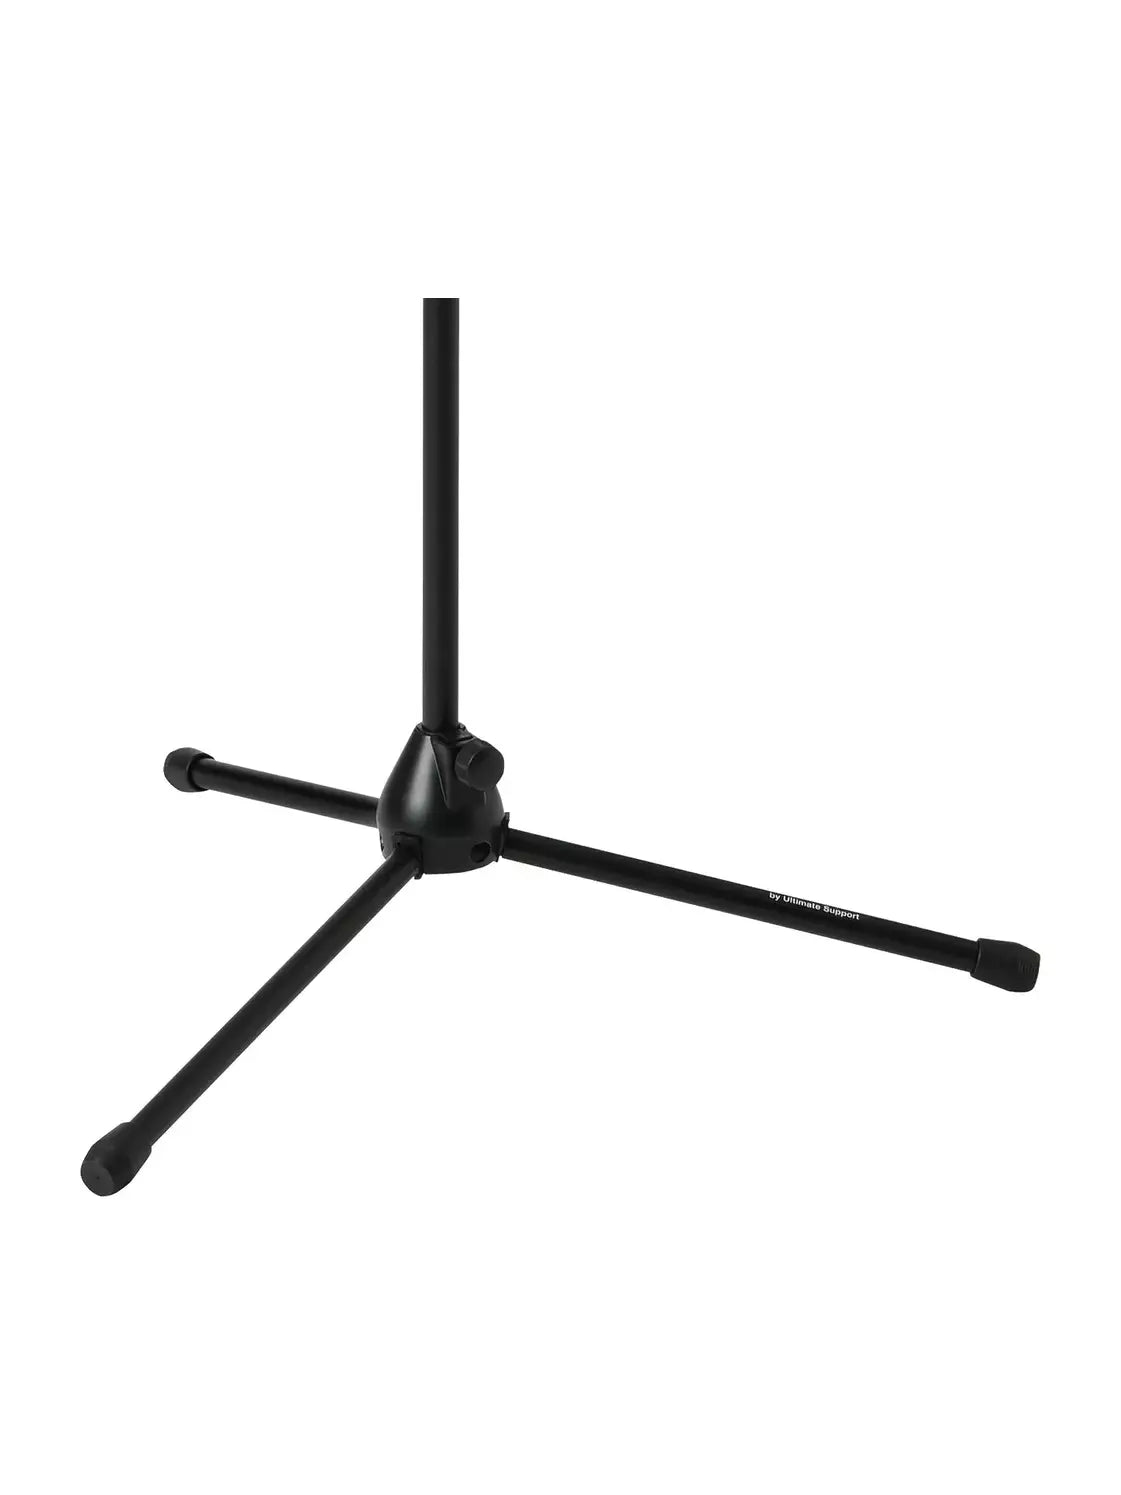 Ultimate Support JS-MC100 JamStands Tripod Mic Stand